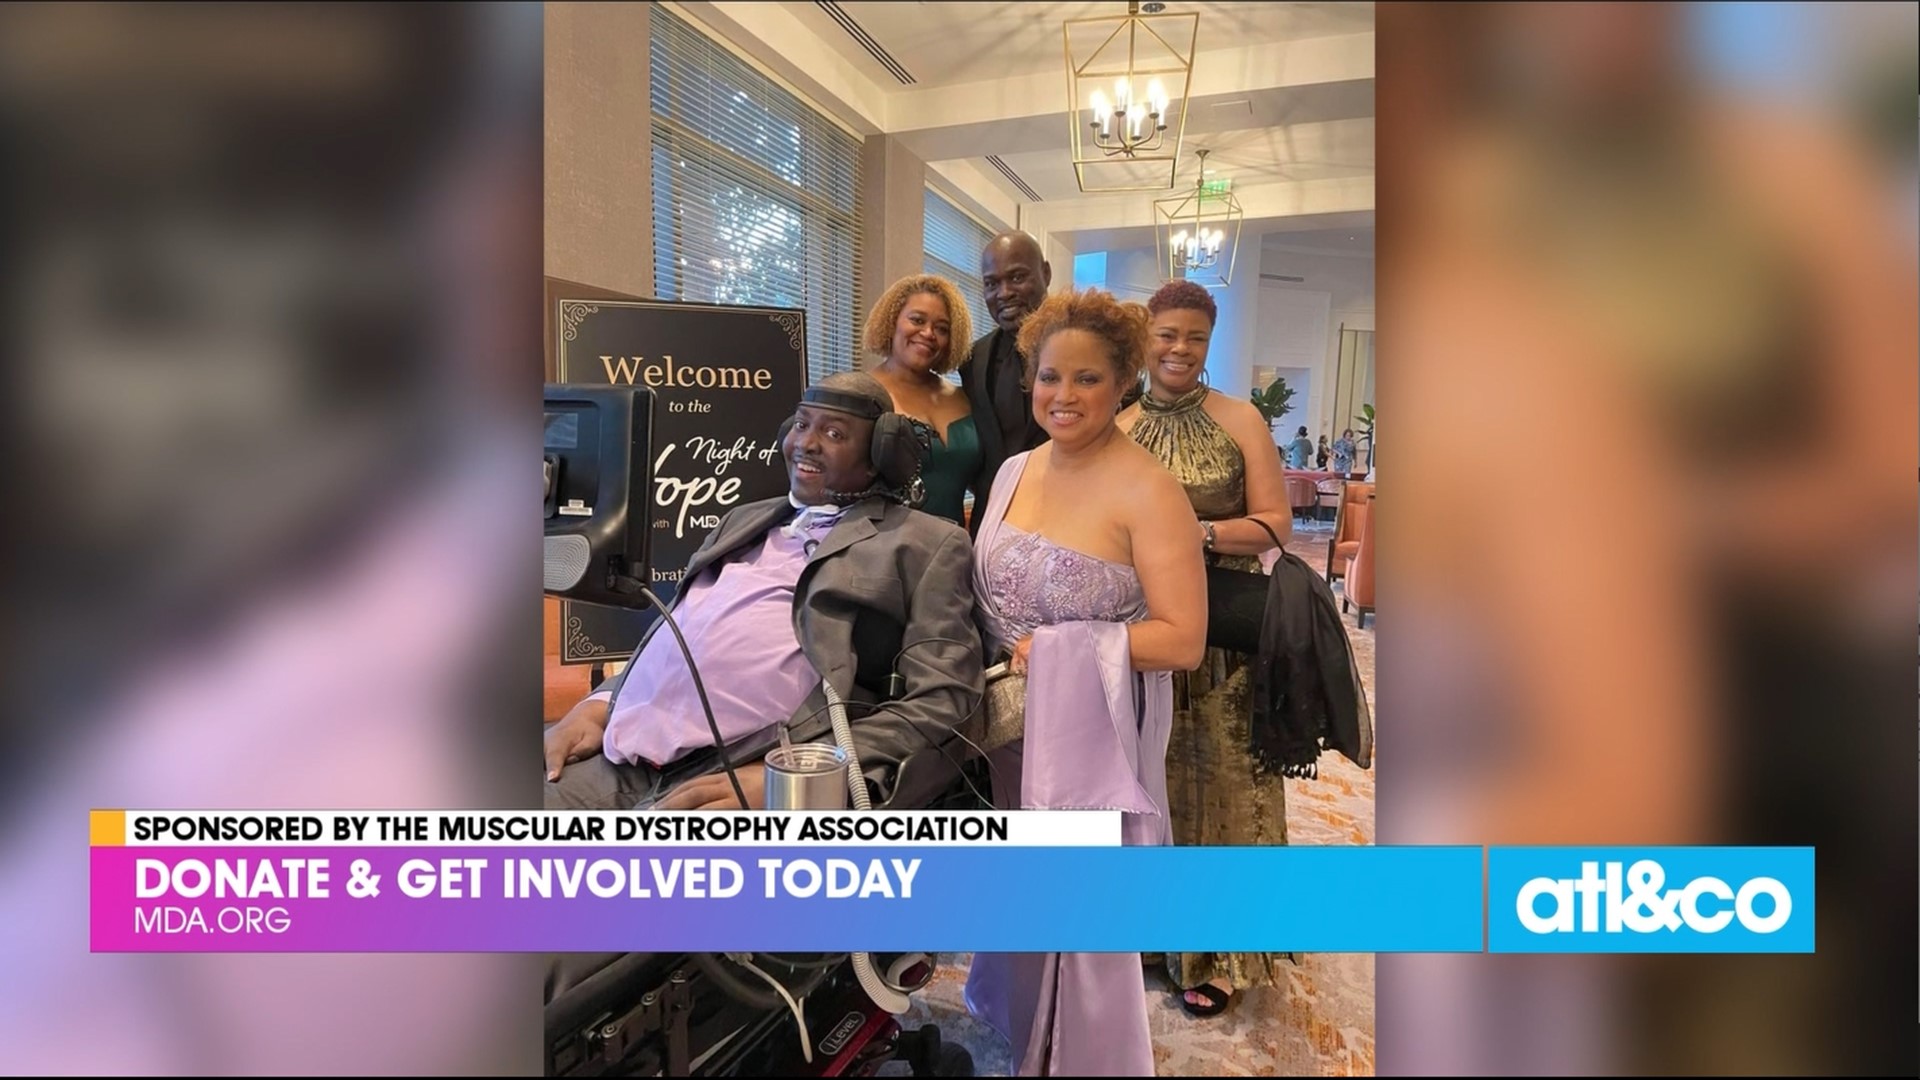 Christine emceed the Muscular Dystrophy Association's Night of Hope Gala over the weekend, which raised over $700,000 to benefit ALS research.